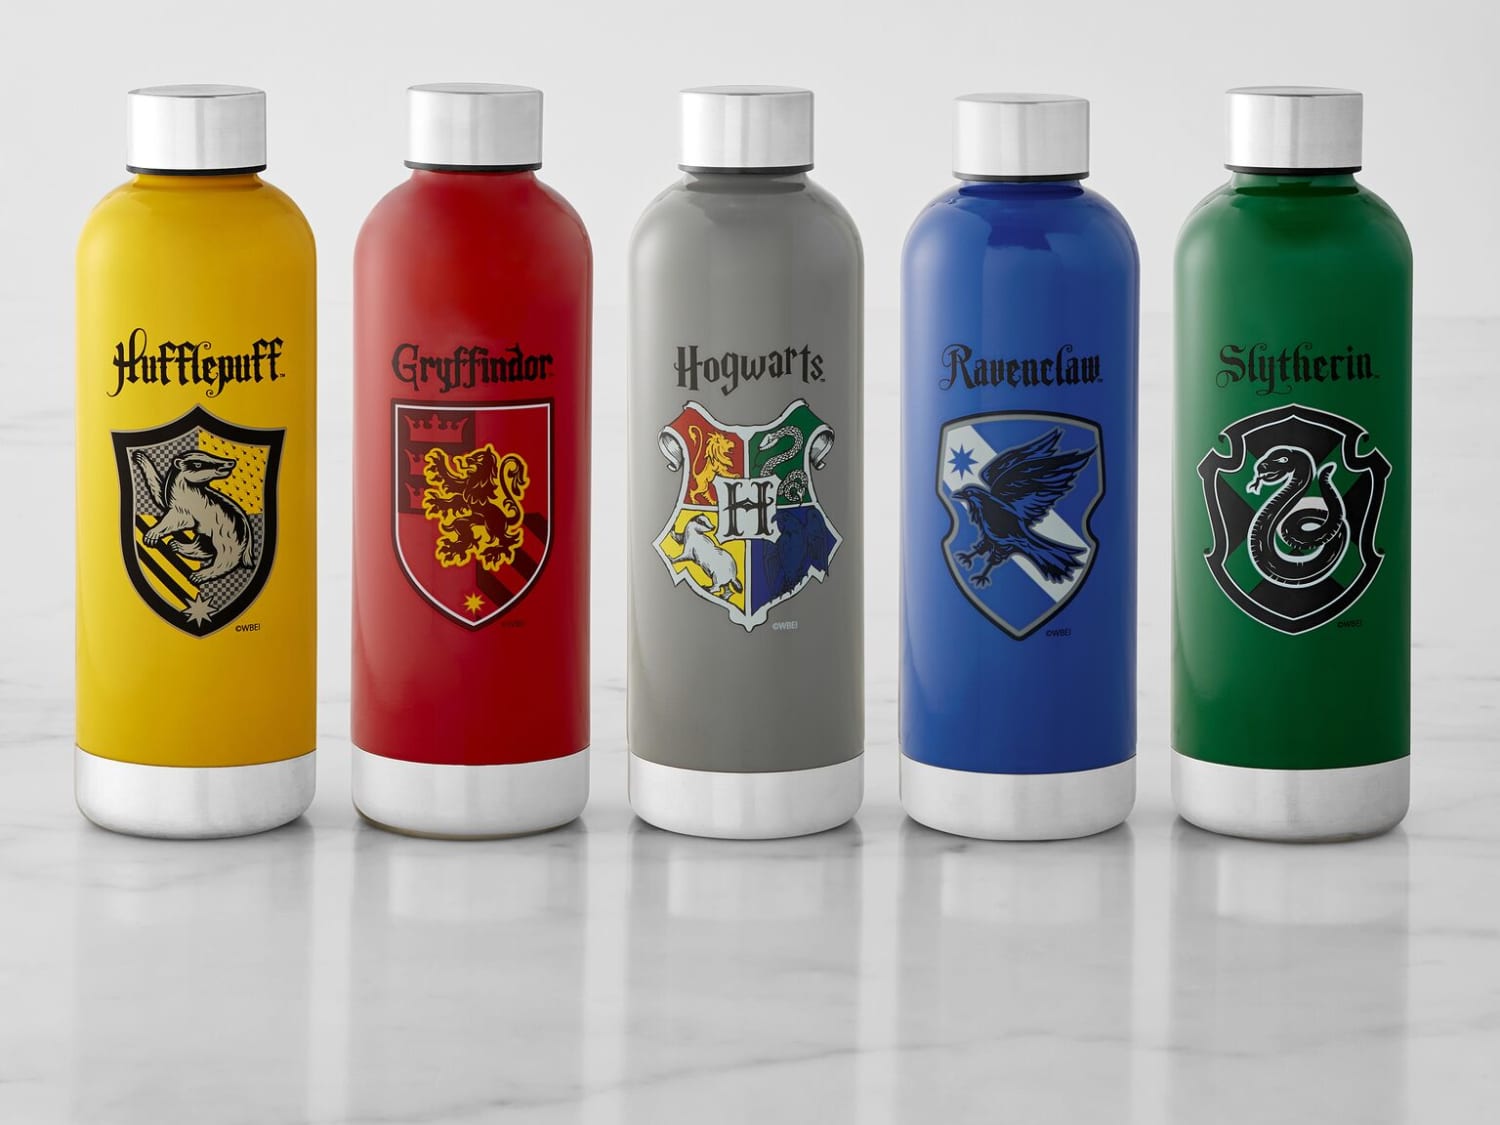 Williams Sonoma Harry Potter Gryffindor Water Bottle Travel Cup